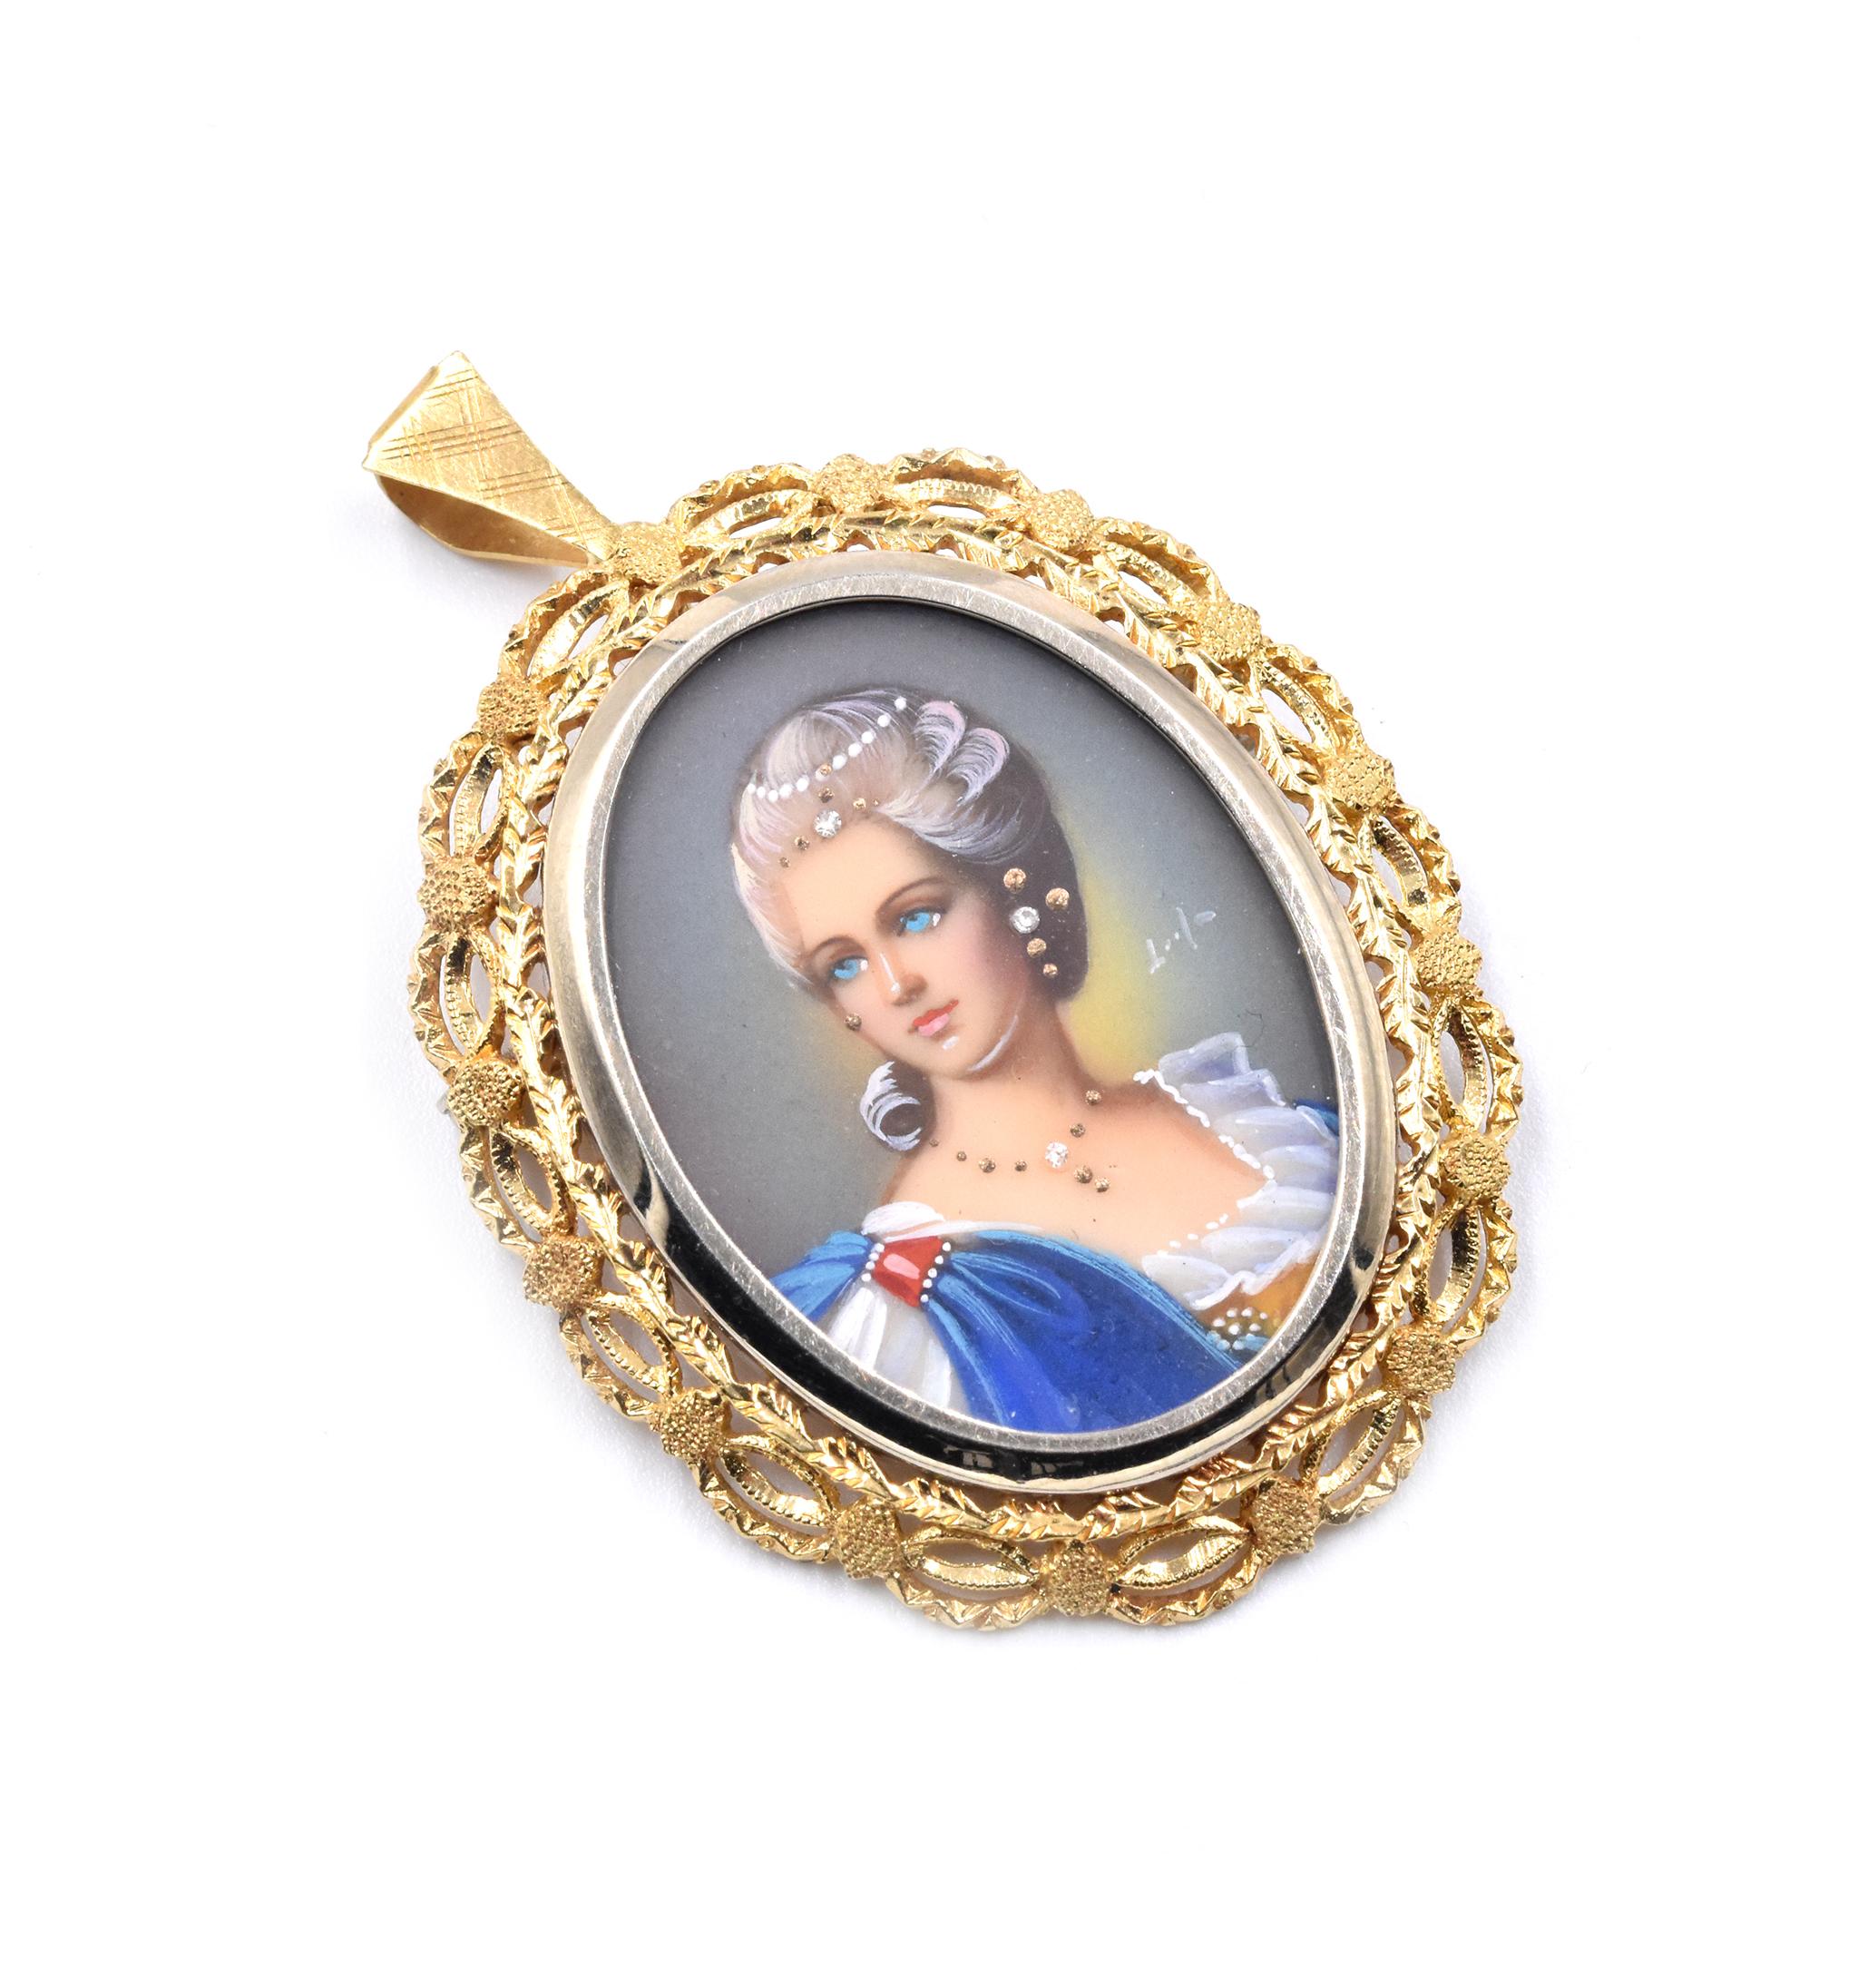 Designer: custom
Material: 18K yellow gold
Dimensions: pin is approximately 49mm X 33mm
Weight: 9.0 grams
